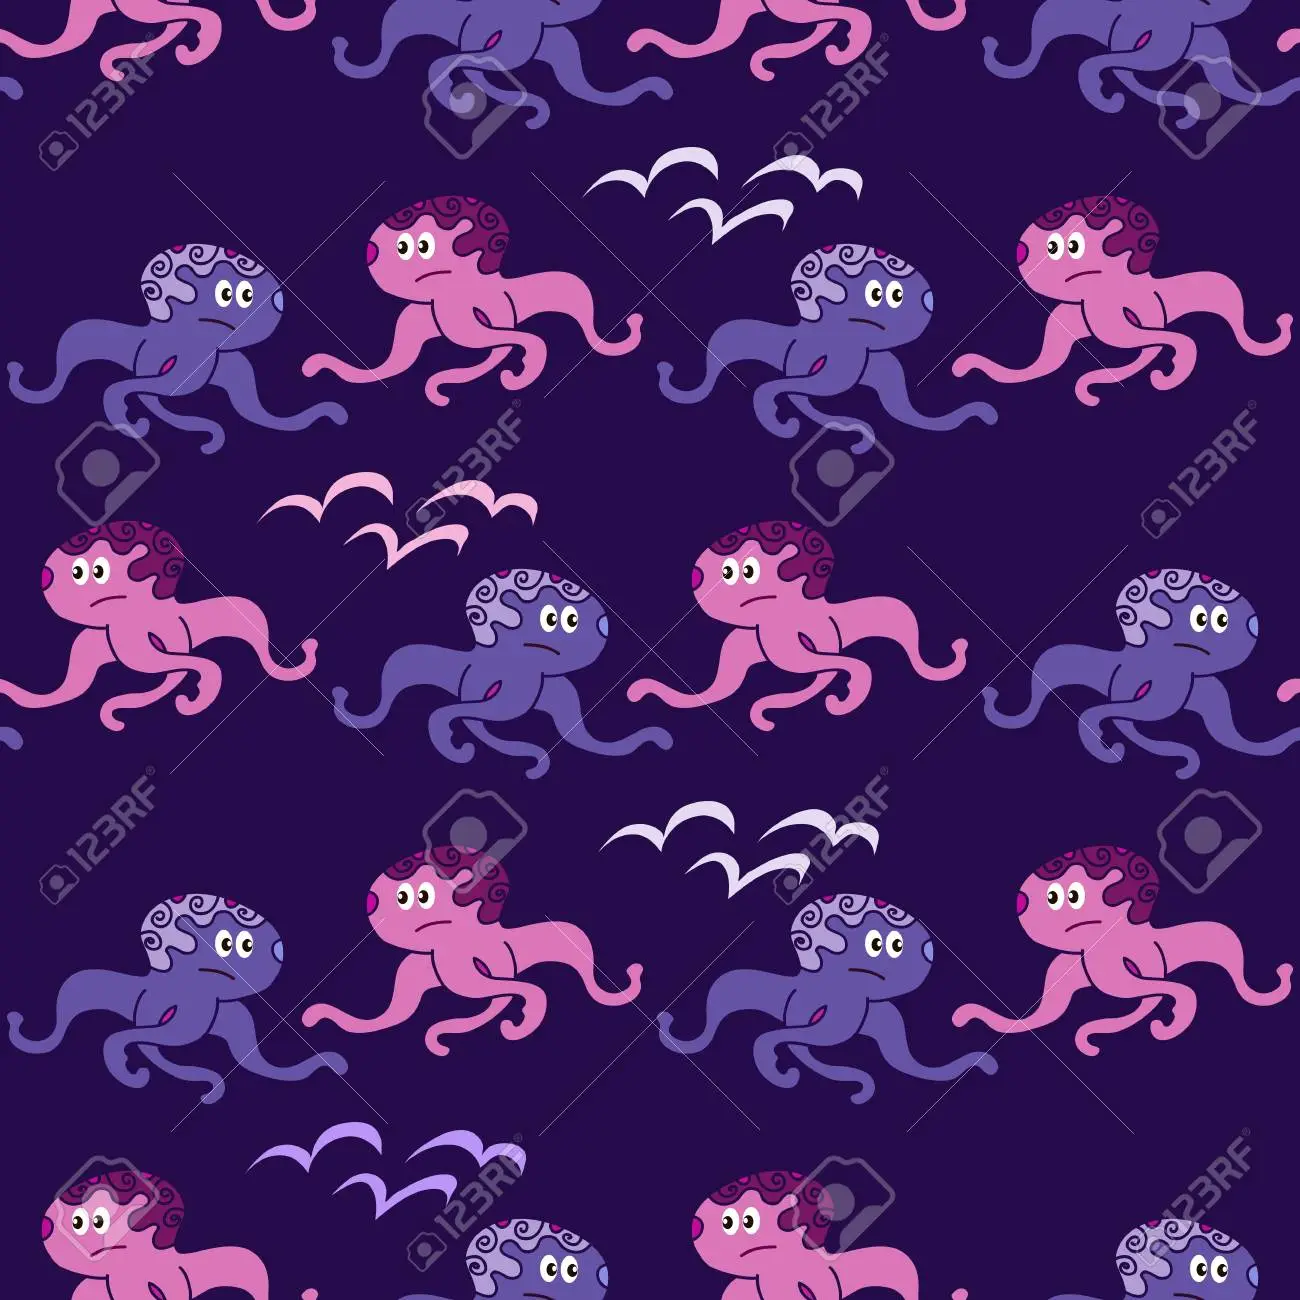 Beautiful seamless pattern with octopus seaweed marine cute background in flat cartoon style for your design posterstextile fabric wallpapers party invitation business products vector illustration royalty free svg cliparts vectors and stock